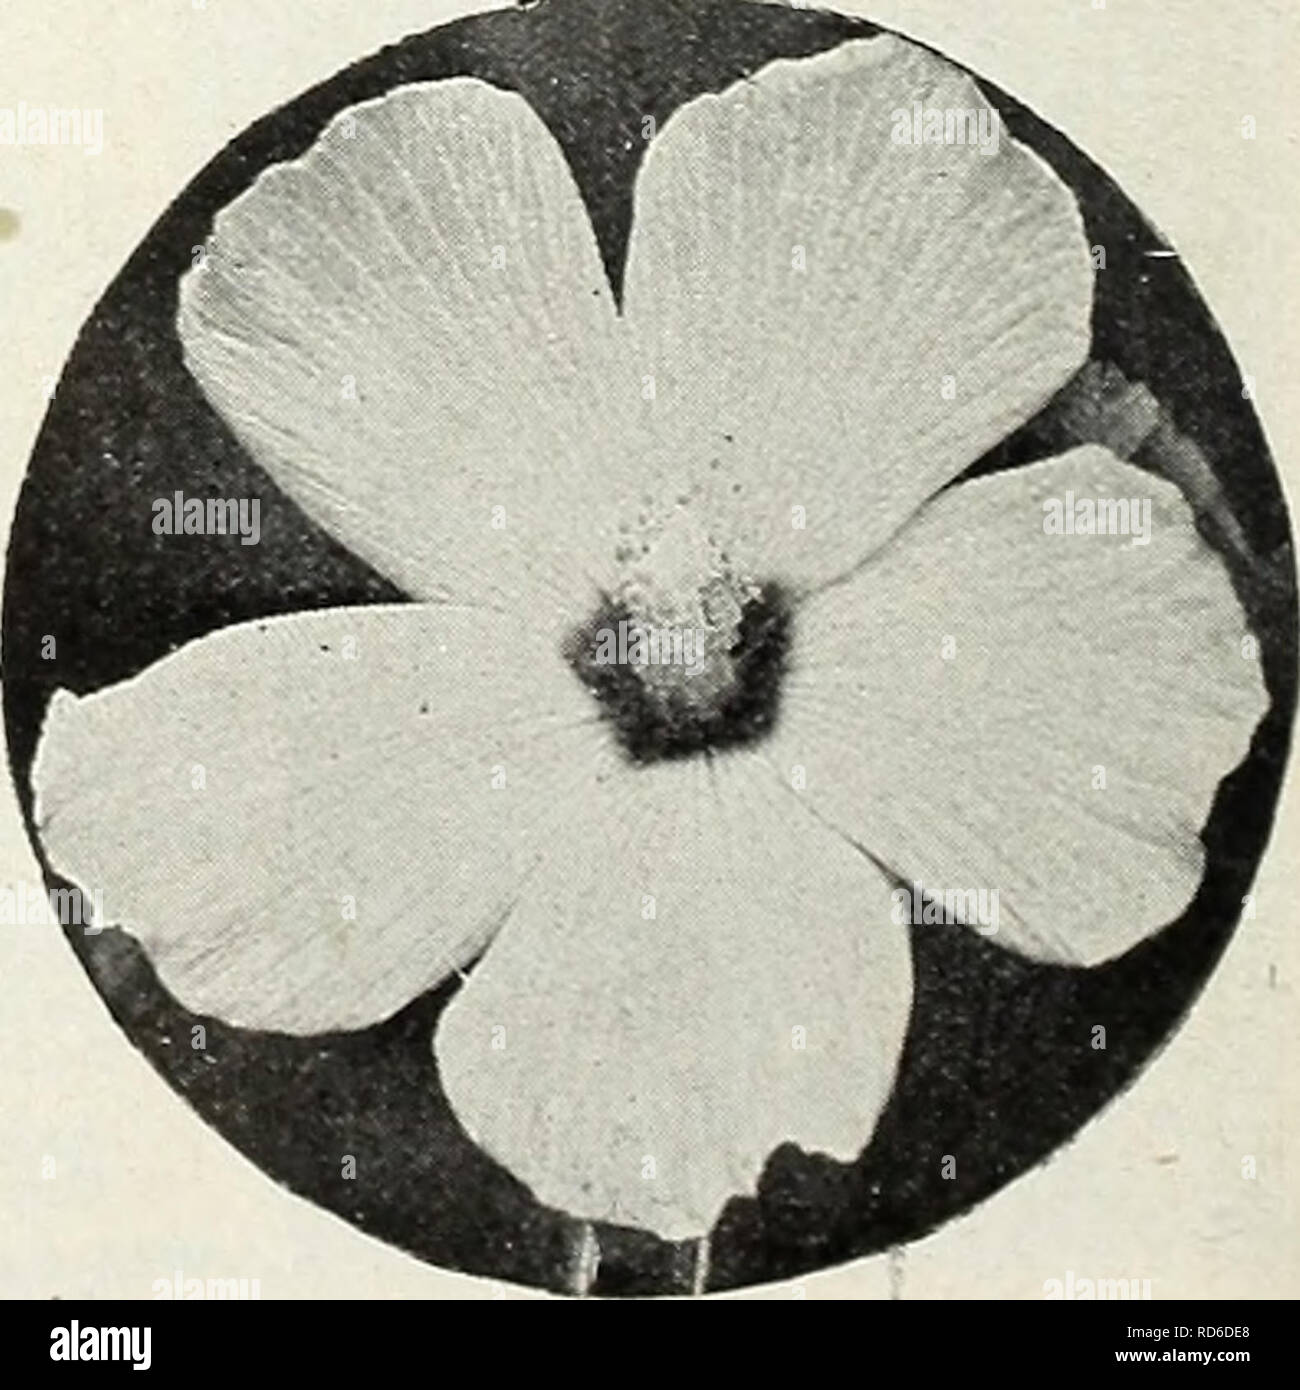 . Currie's garden annual : spring 1931 56th year. Flowers Seeds Catalogs; Bulbs (Plants) Seeds Catalogs; Vegetables Seeds Catalogs; Nurseries (Horticulture) Catalogs; Plants, Ornamental Catalogs; Gardening Equipment and supplies Catalogs. GNAPHALIUM EDELWEISS The true Edelweiss of the Alps. The flowers are of a downy appearance, pure white and star-shaped. H. P $0.15 GODETIA Popular, showy, hardy annuals bearing a profusion of brilliant colored flowers during the entire Finest Mixed, '/a oz., 20c...$0.10 HIBISCUS (MARSHMALLOW) Handsome, hardy perennial plants bearing very large, beau- tifully  Stock Photo